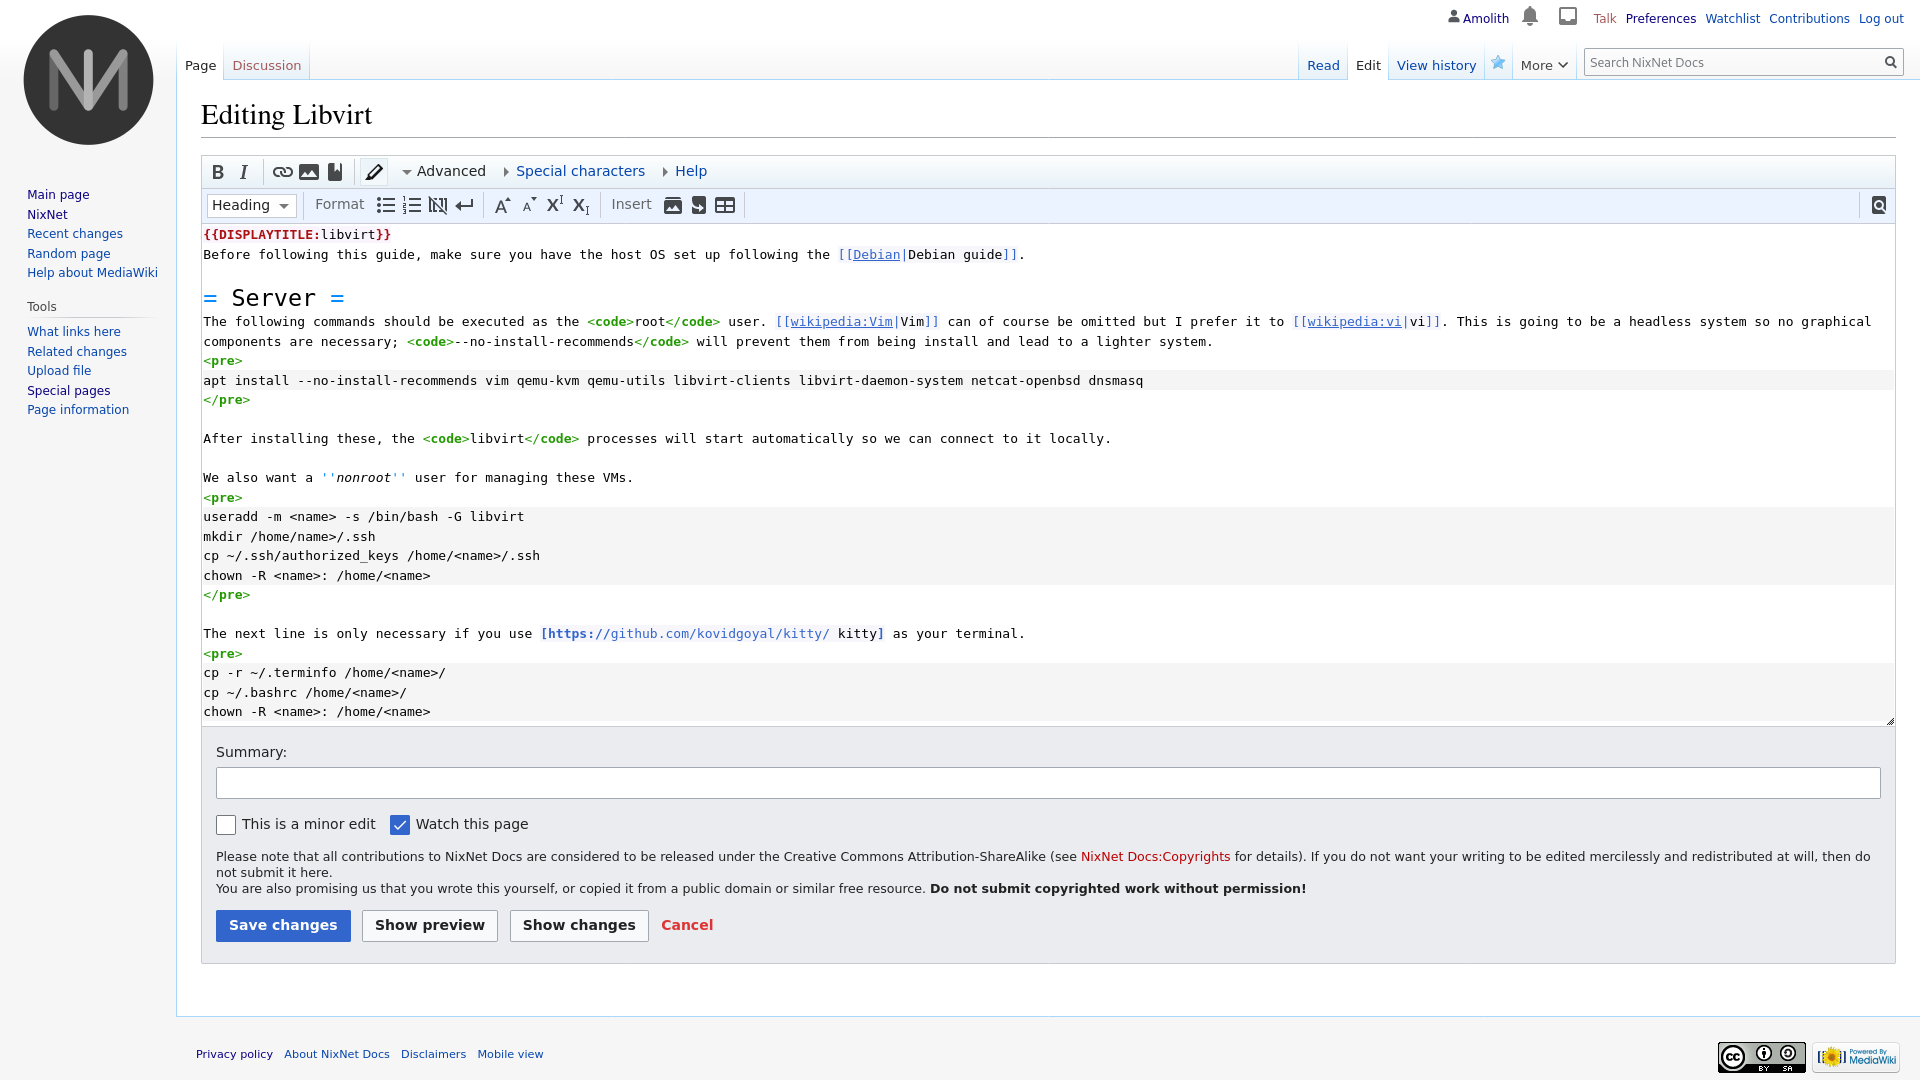 screenshot of the mediawiki editor. headers are larger, code blocksare highlighted, links blue with link text black so it&rsquo;s easy to pickout, etc. In all, it&rsquo;s a much nicerexperience.